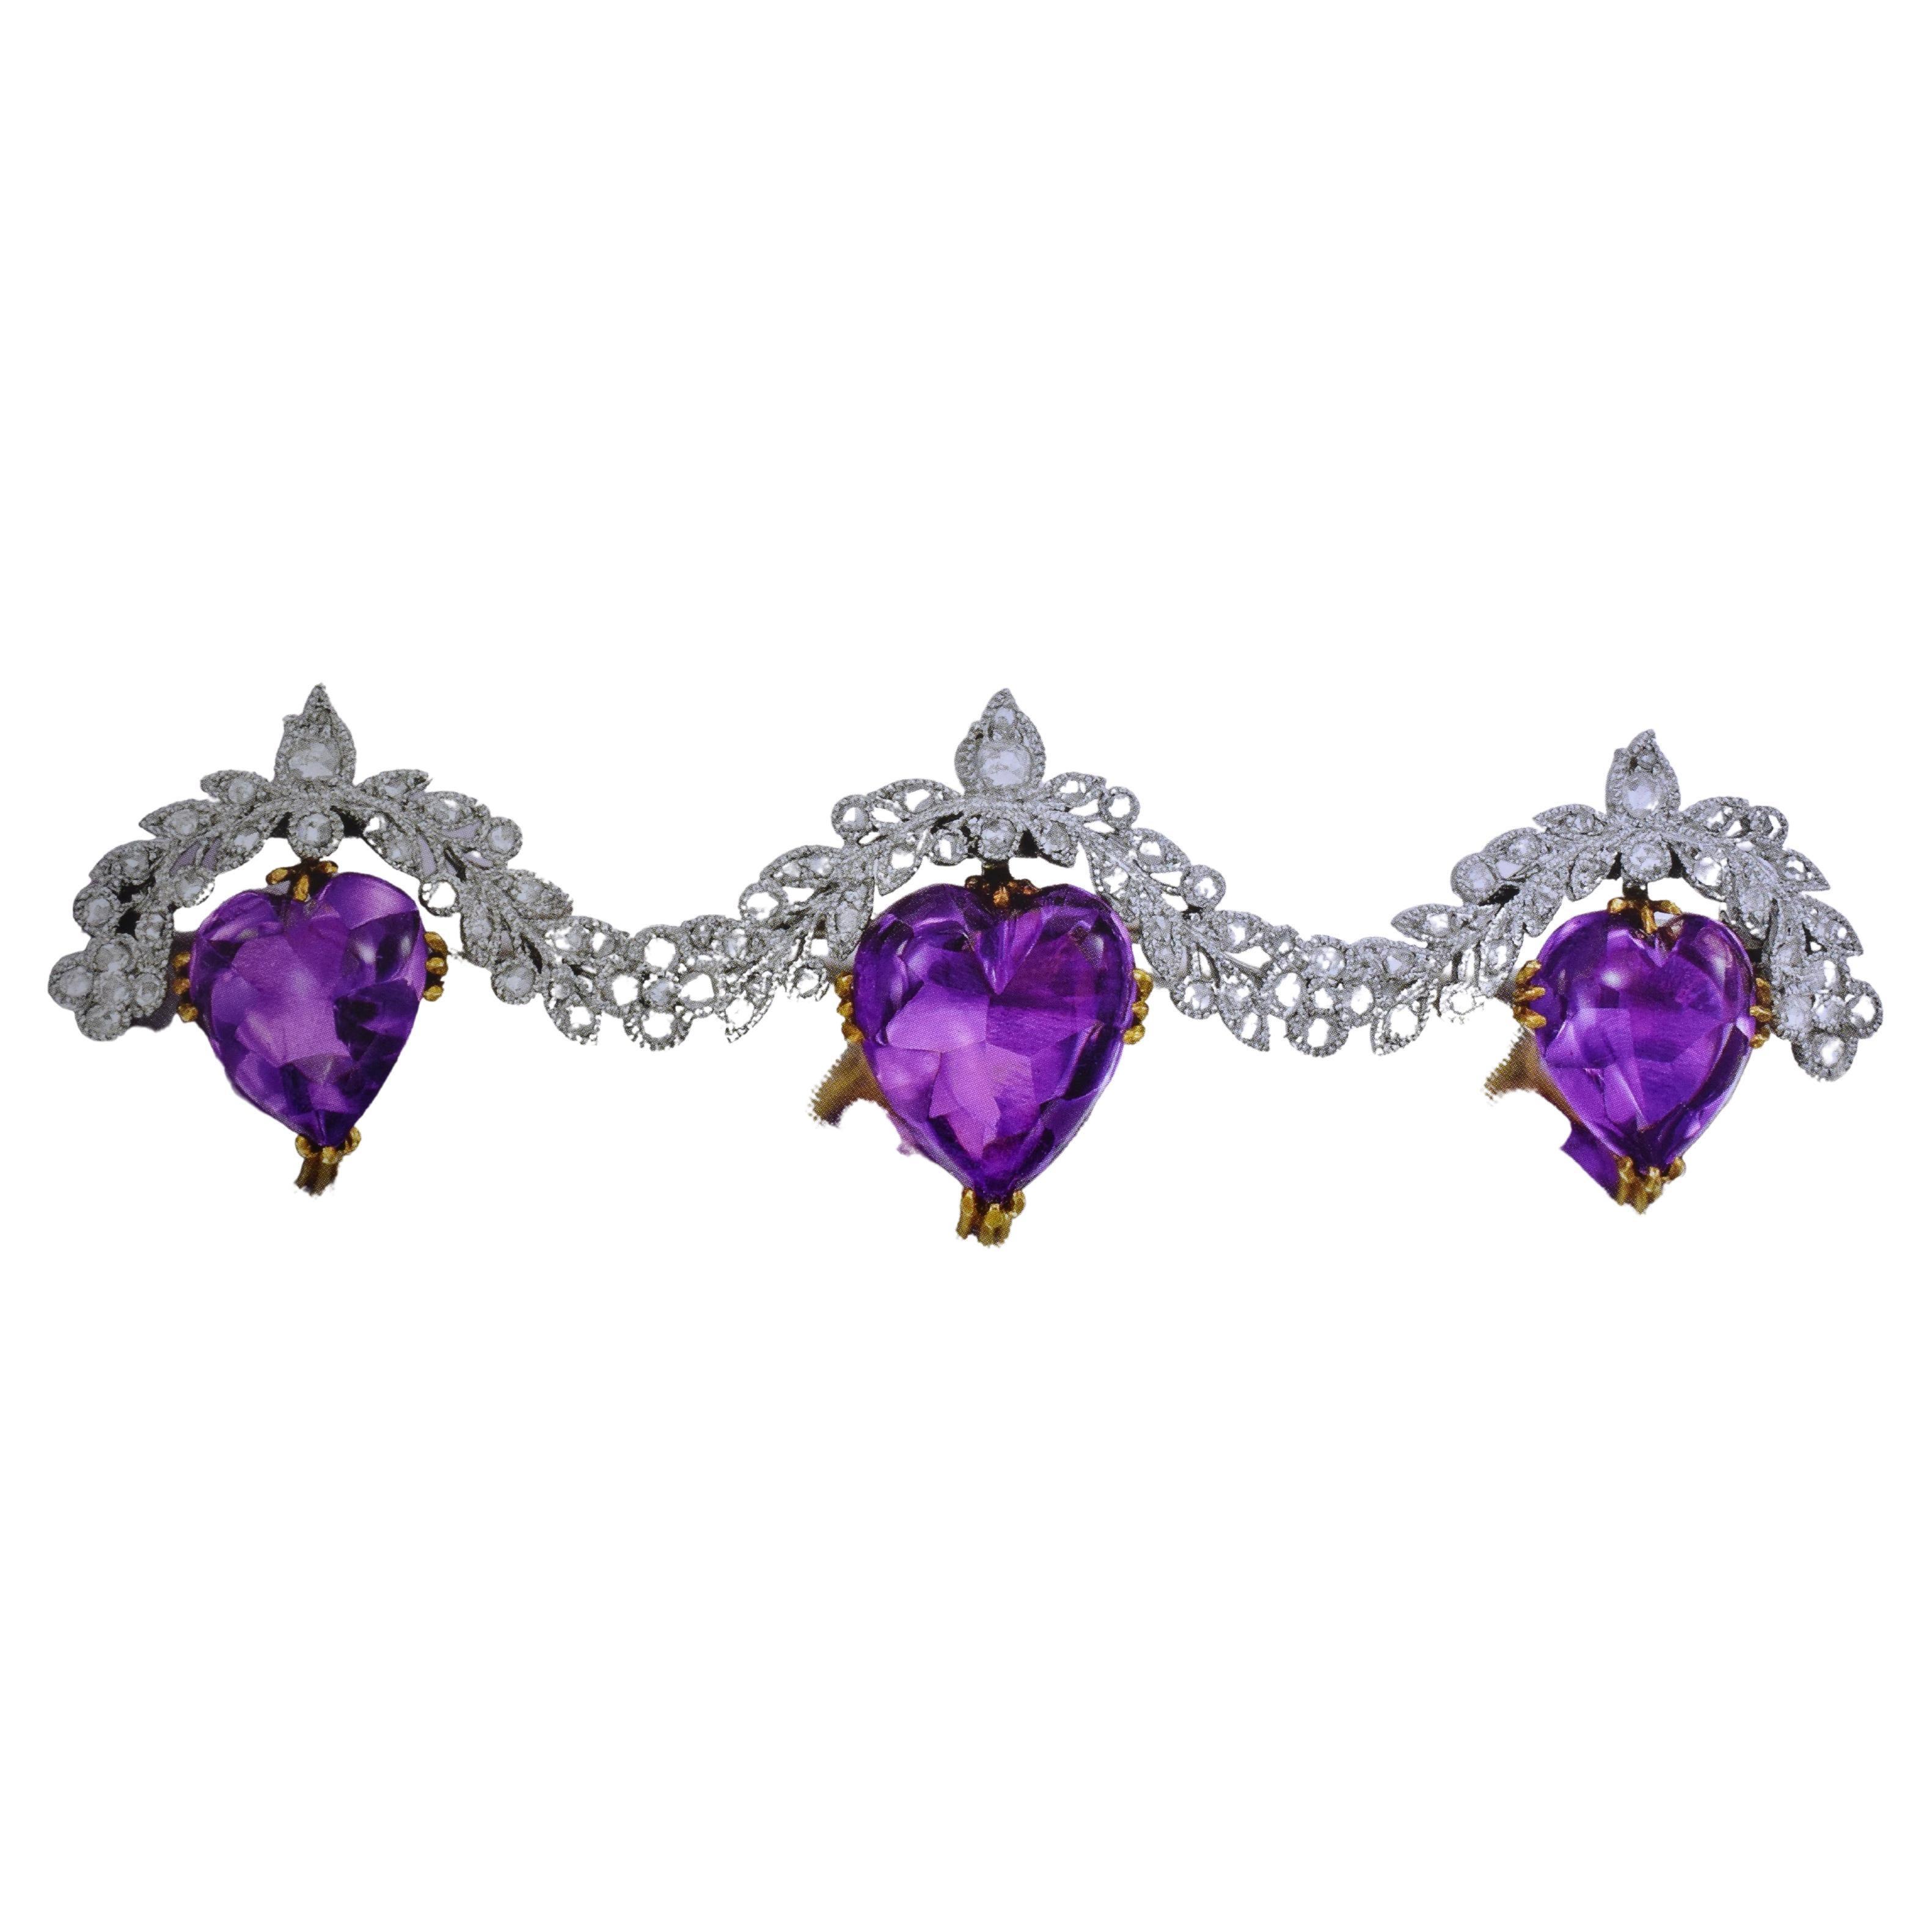 Antique Heart shaped Amethyst Brooch with Diamond, Edwardian, circa 1910 For Sale